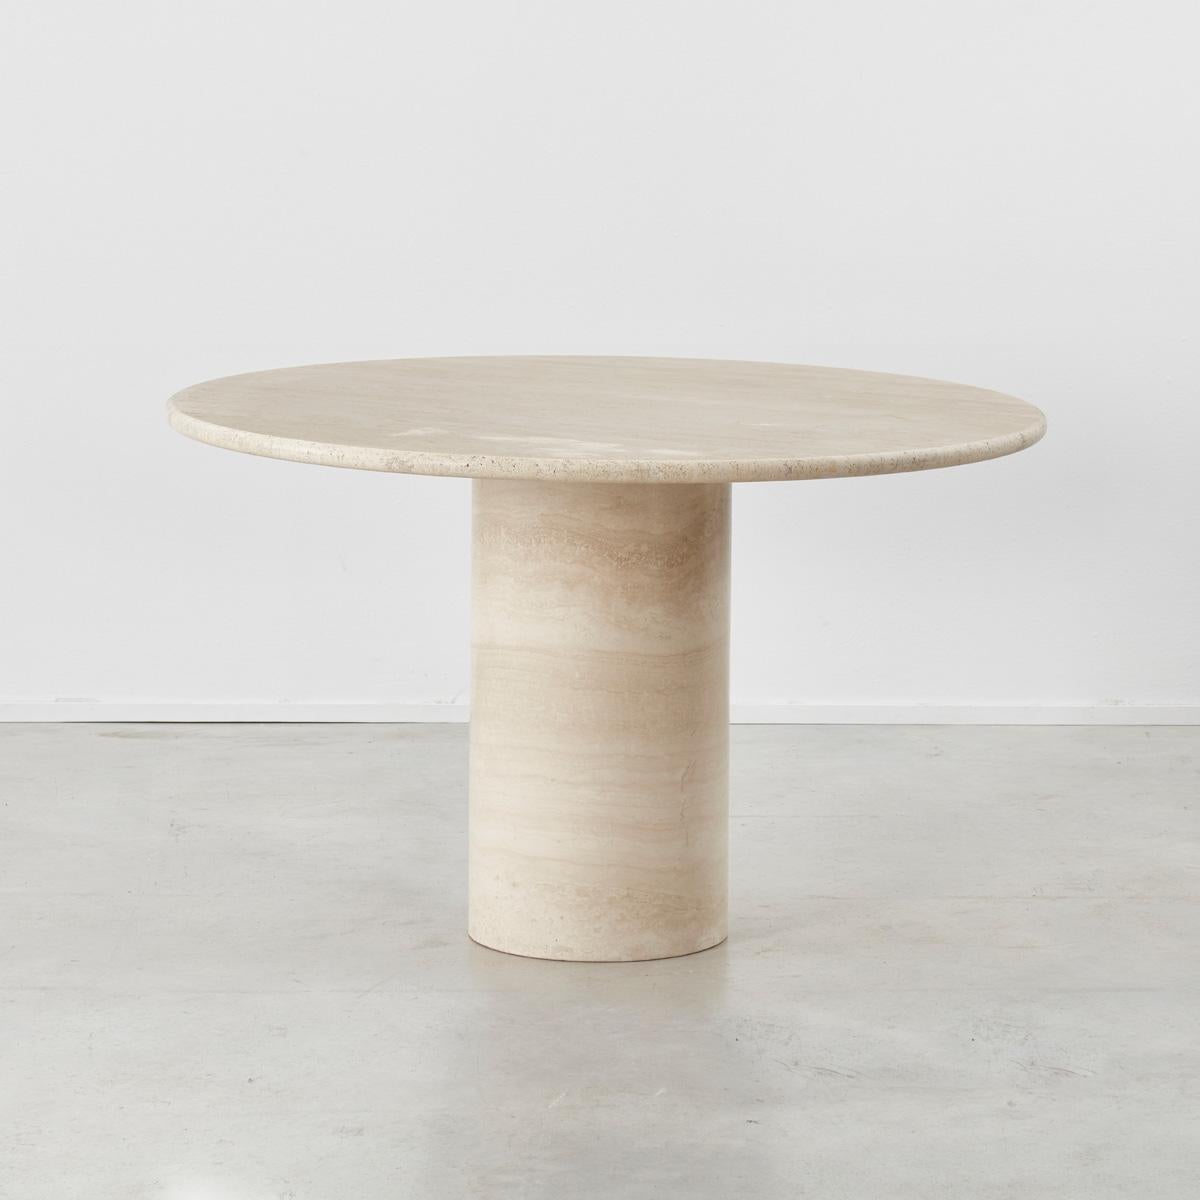 This minimal dining table is cut from travertine stone and presents a form not too dissimilar to one by Angelo Mangiarotti for Up&Up. Travertine is a form of limestone that exhibits pleasing natural colour variations, its holey surface adding